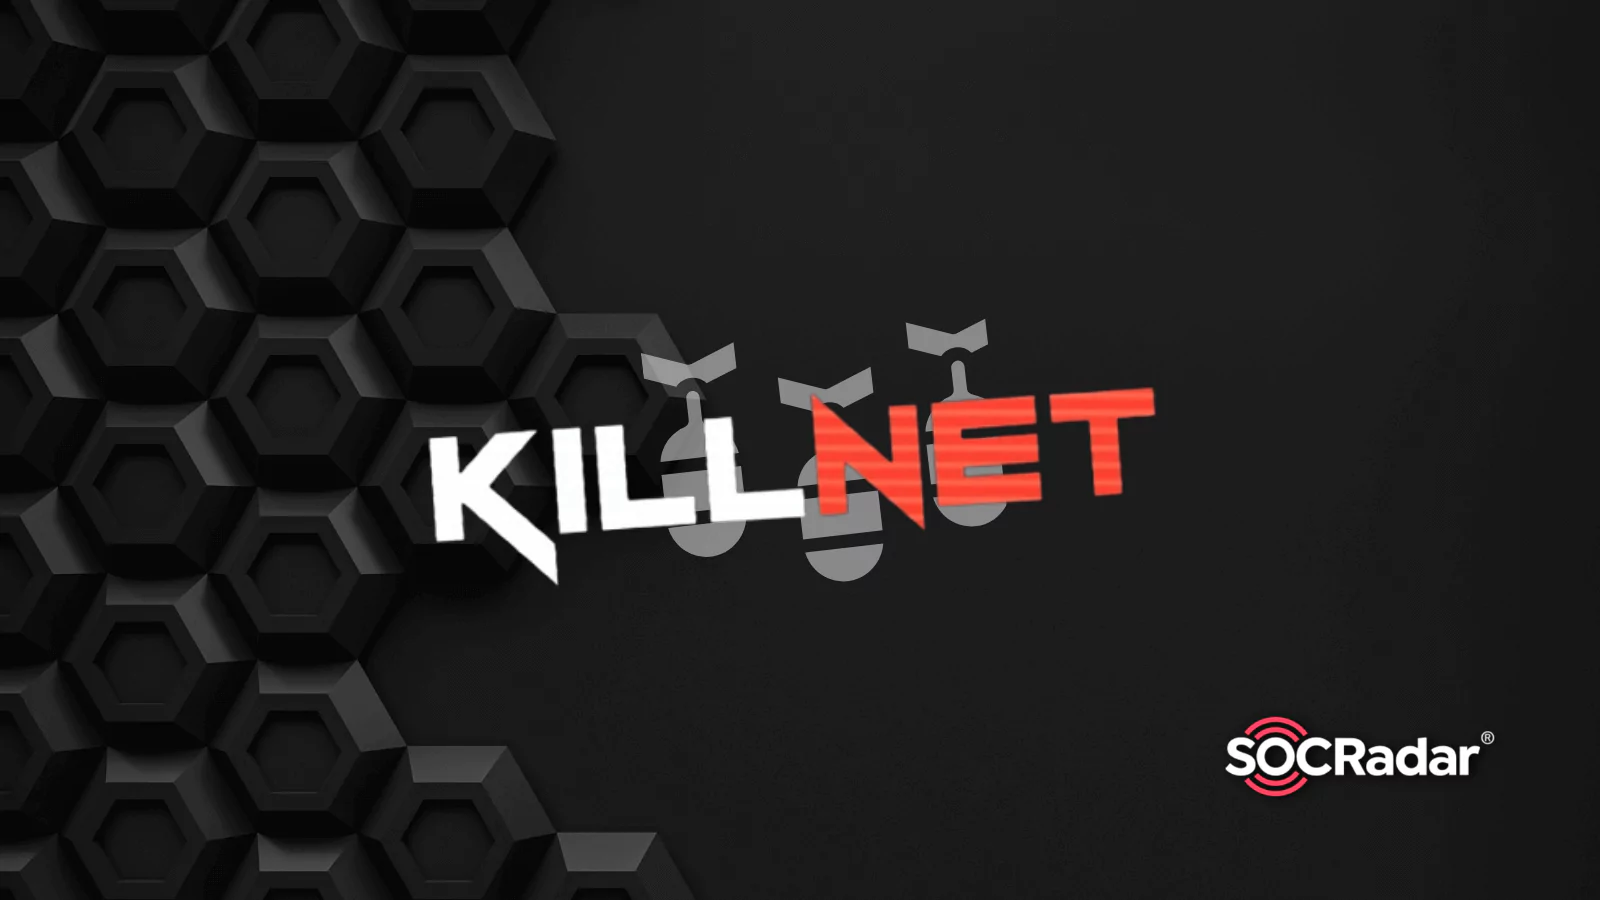 SOCRadar® Cyber Intelligence Inc. | Does the Killnet Pose a Serious Threat to Our Industry?